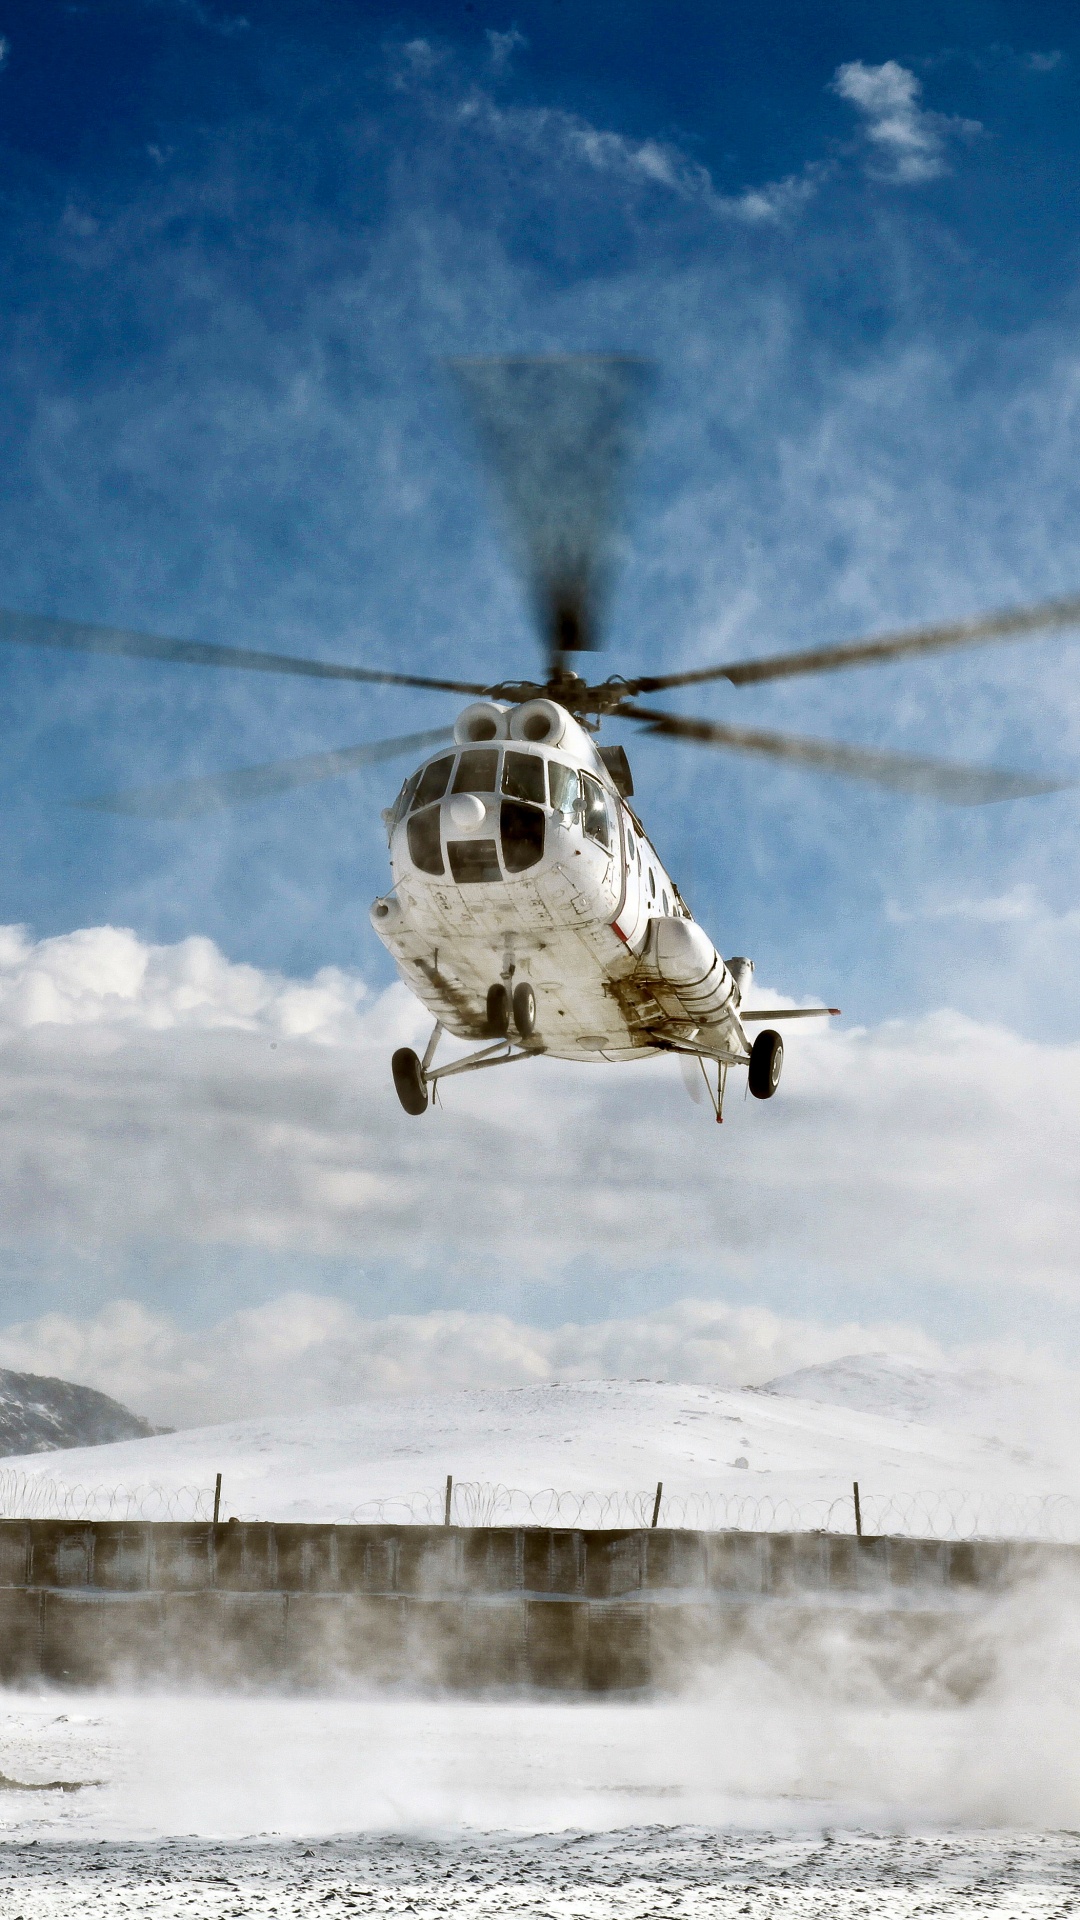 White and Black Helicopter Flying Over Snow Covered Mountain During Daytime. Wallpaper in 1080x1920 Resolution